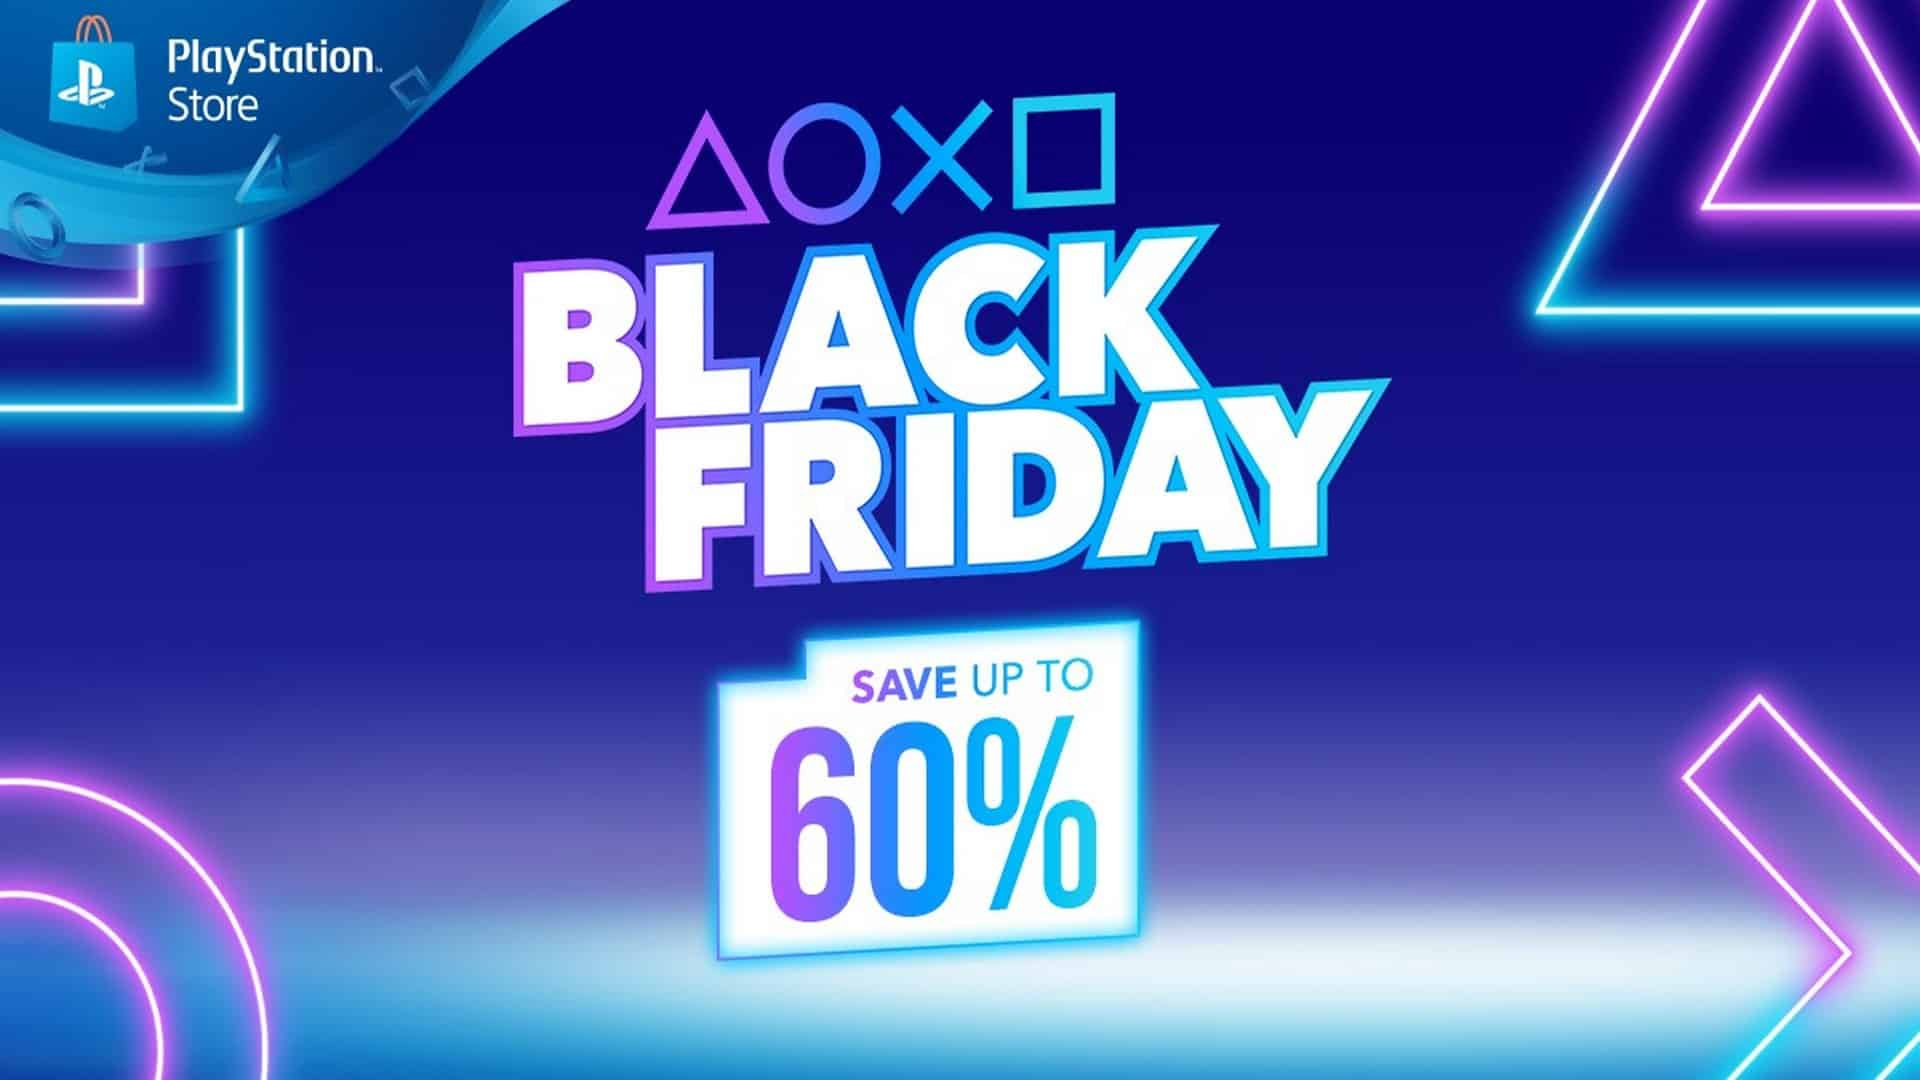 Hey Look, a Black Friday Advert Has Appeared on the PS4's Dashboard - Does Playstation Store Do Black Friday Deals